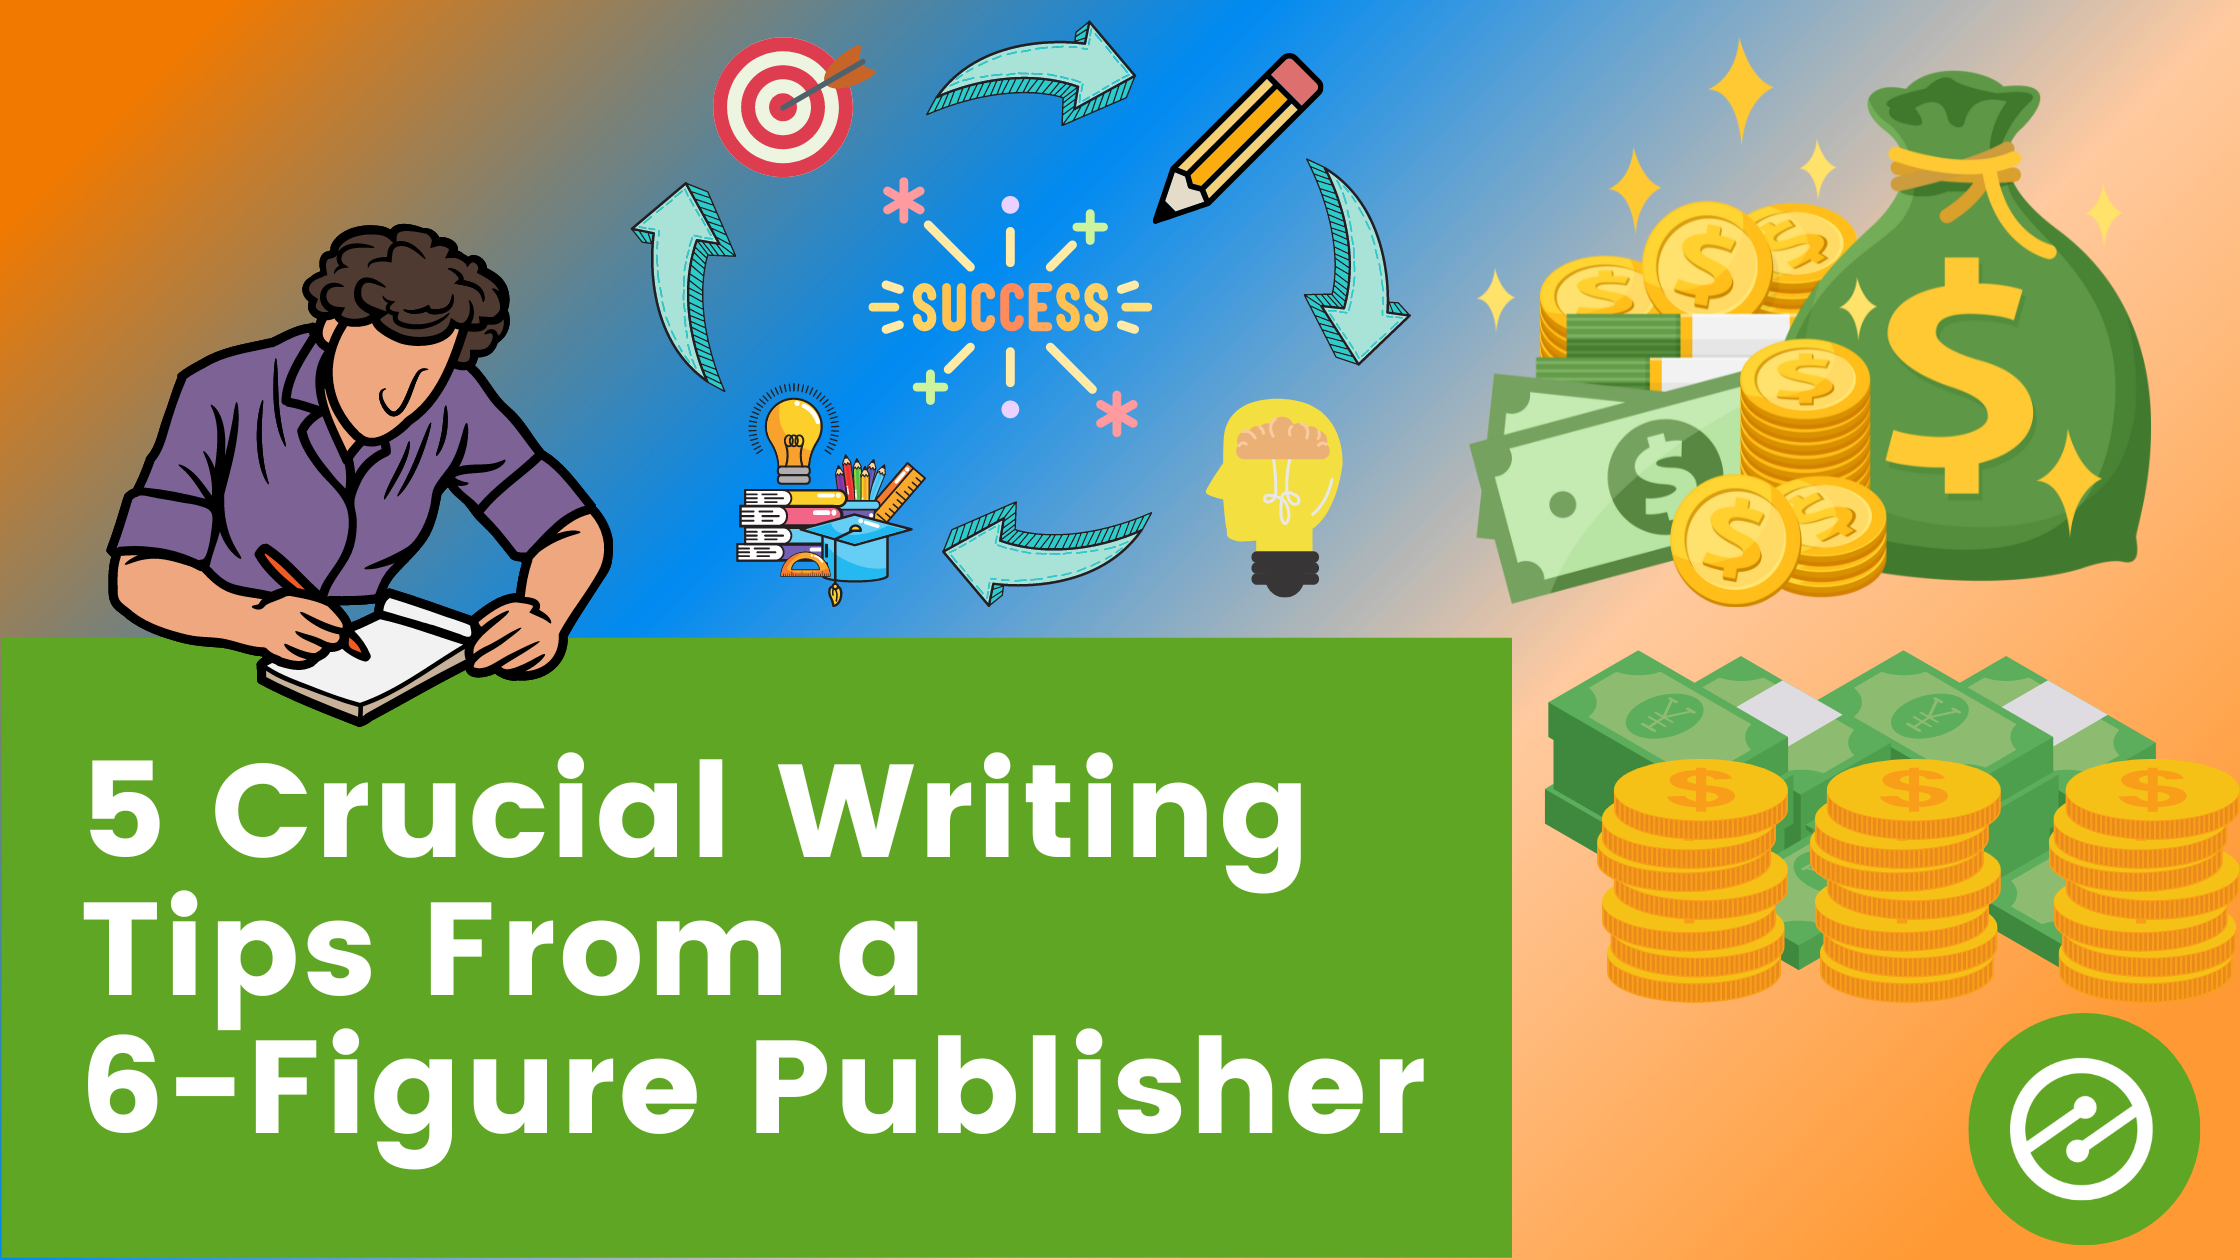 5 Crucial Writing Tips From a 6-Figure Publisher